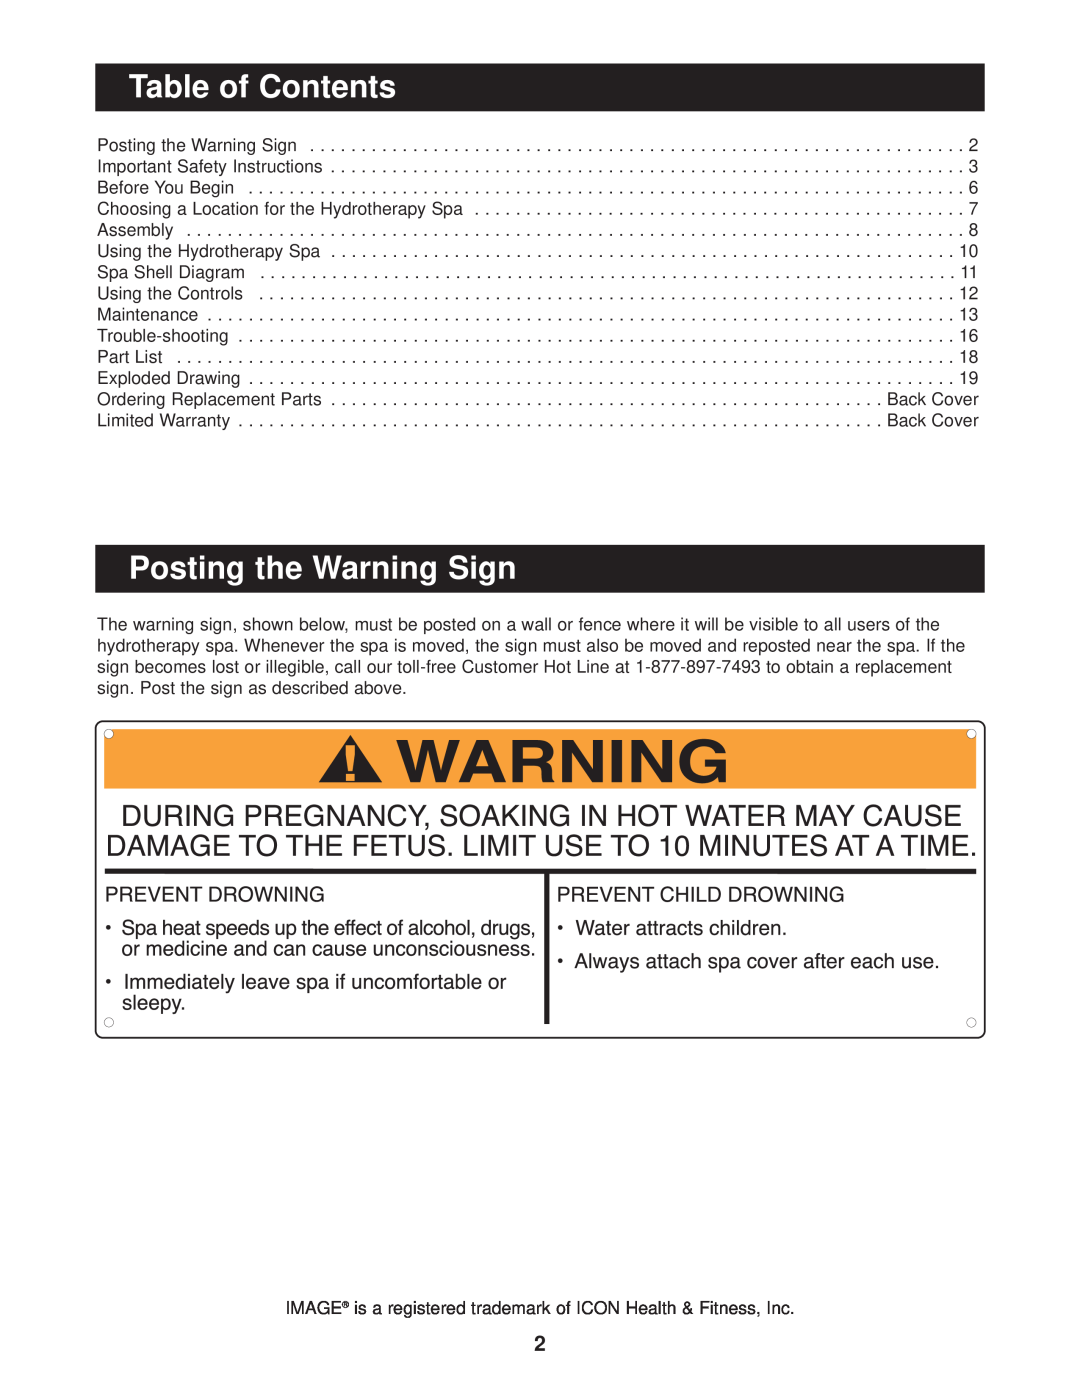 Image IMHS63100 Table of Contents, Posting the Warning Sign, IMAGE is a registered trademark of ICON Health & Fitness, Inc 